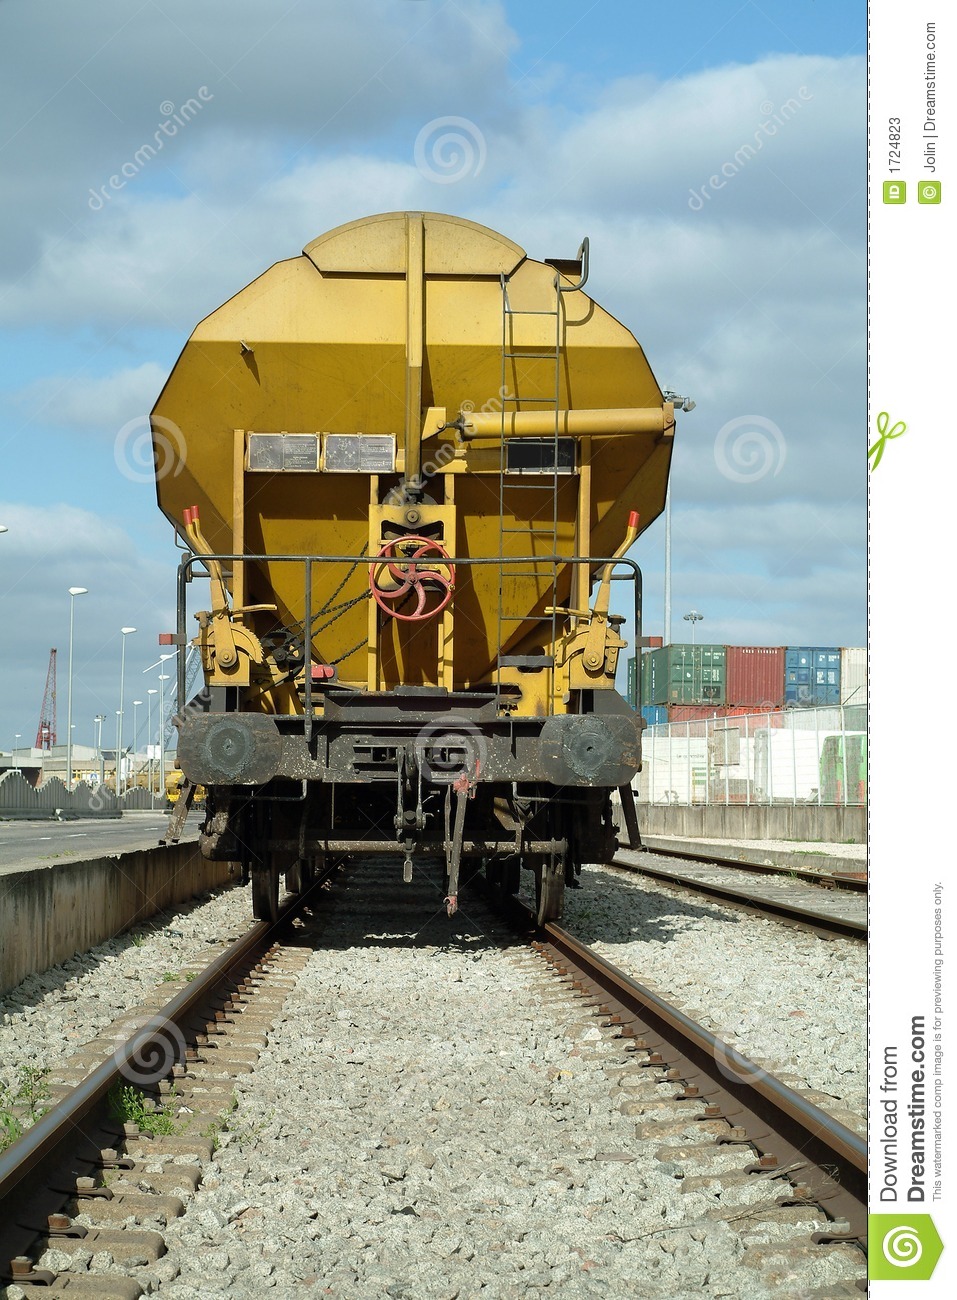 Yellow Freight Train Cargo Wagon In The Train Station 